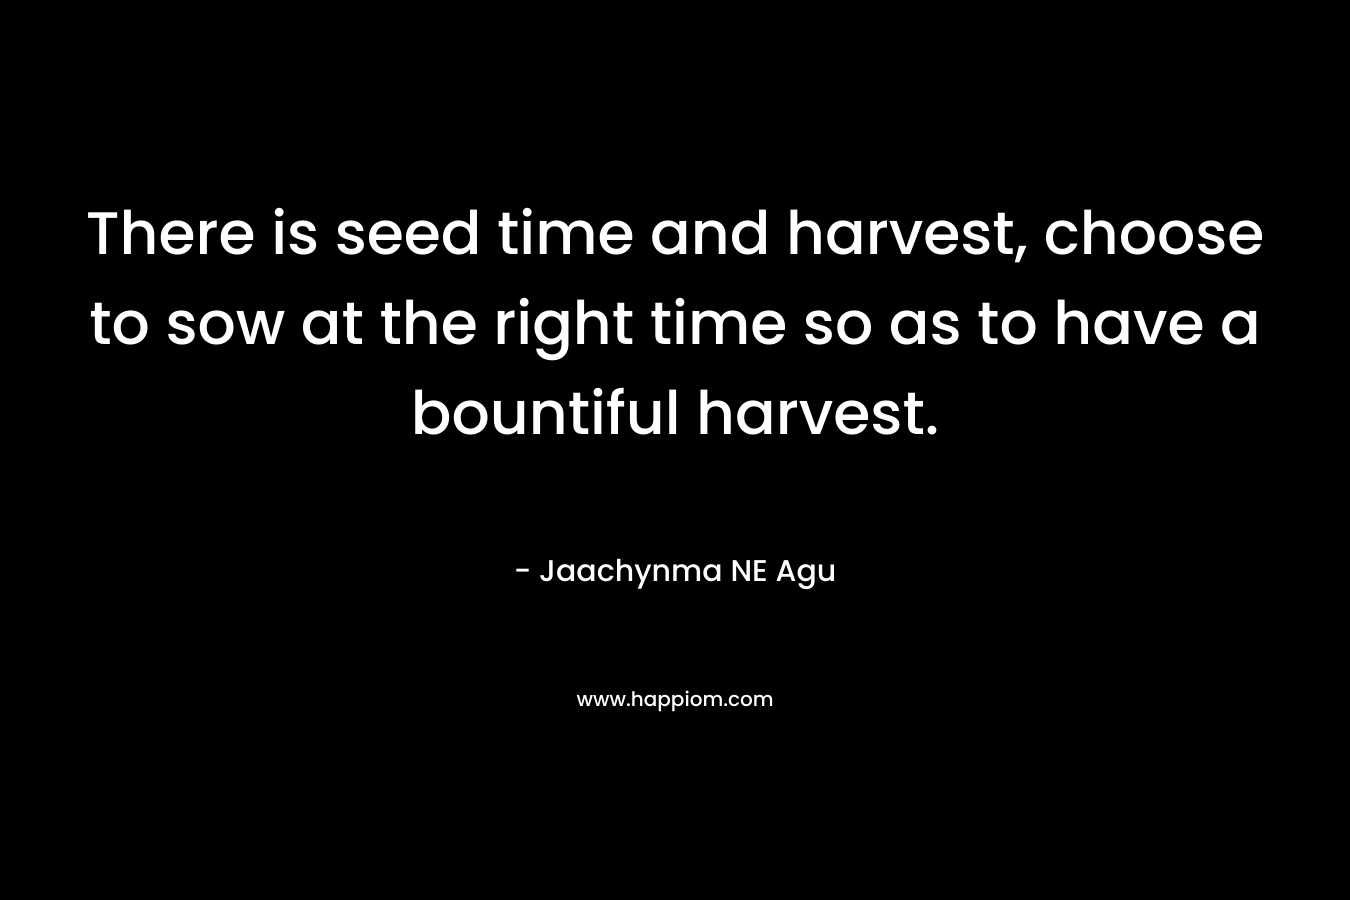 There is seed time and harvest, choose to sow at the right time so as to have a bountiful harvest.